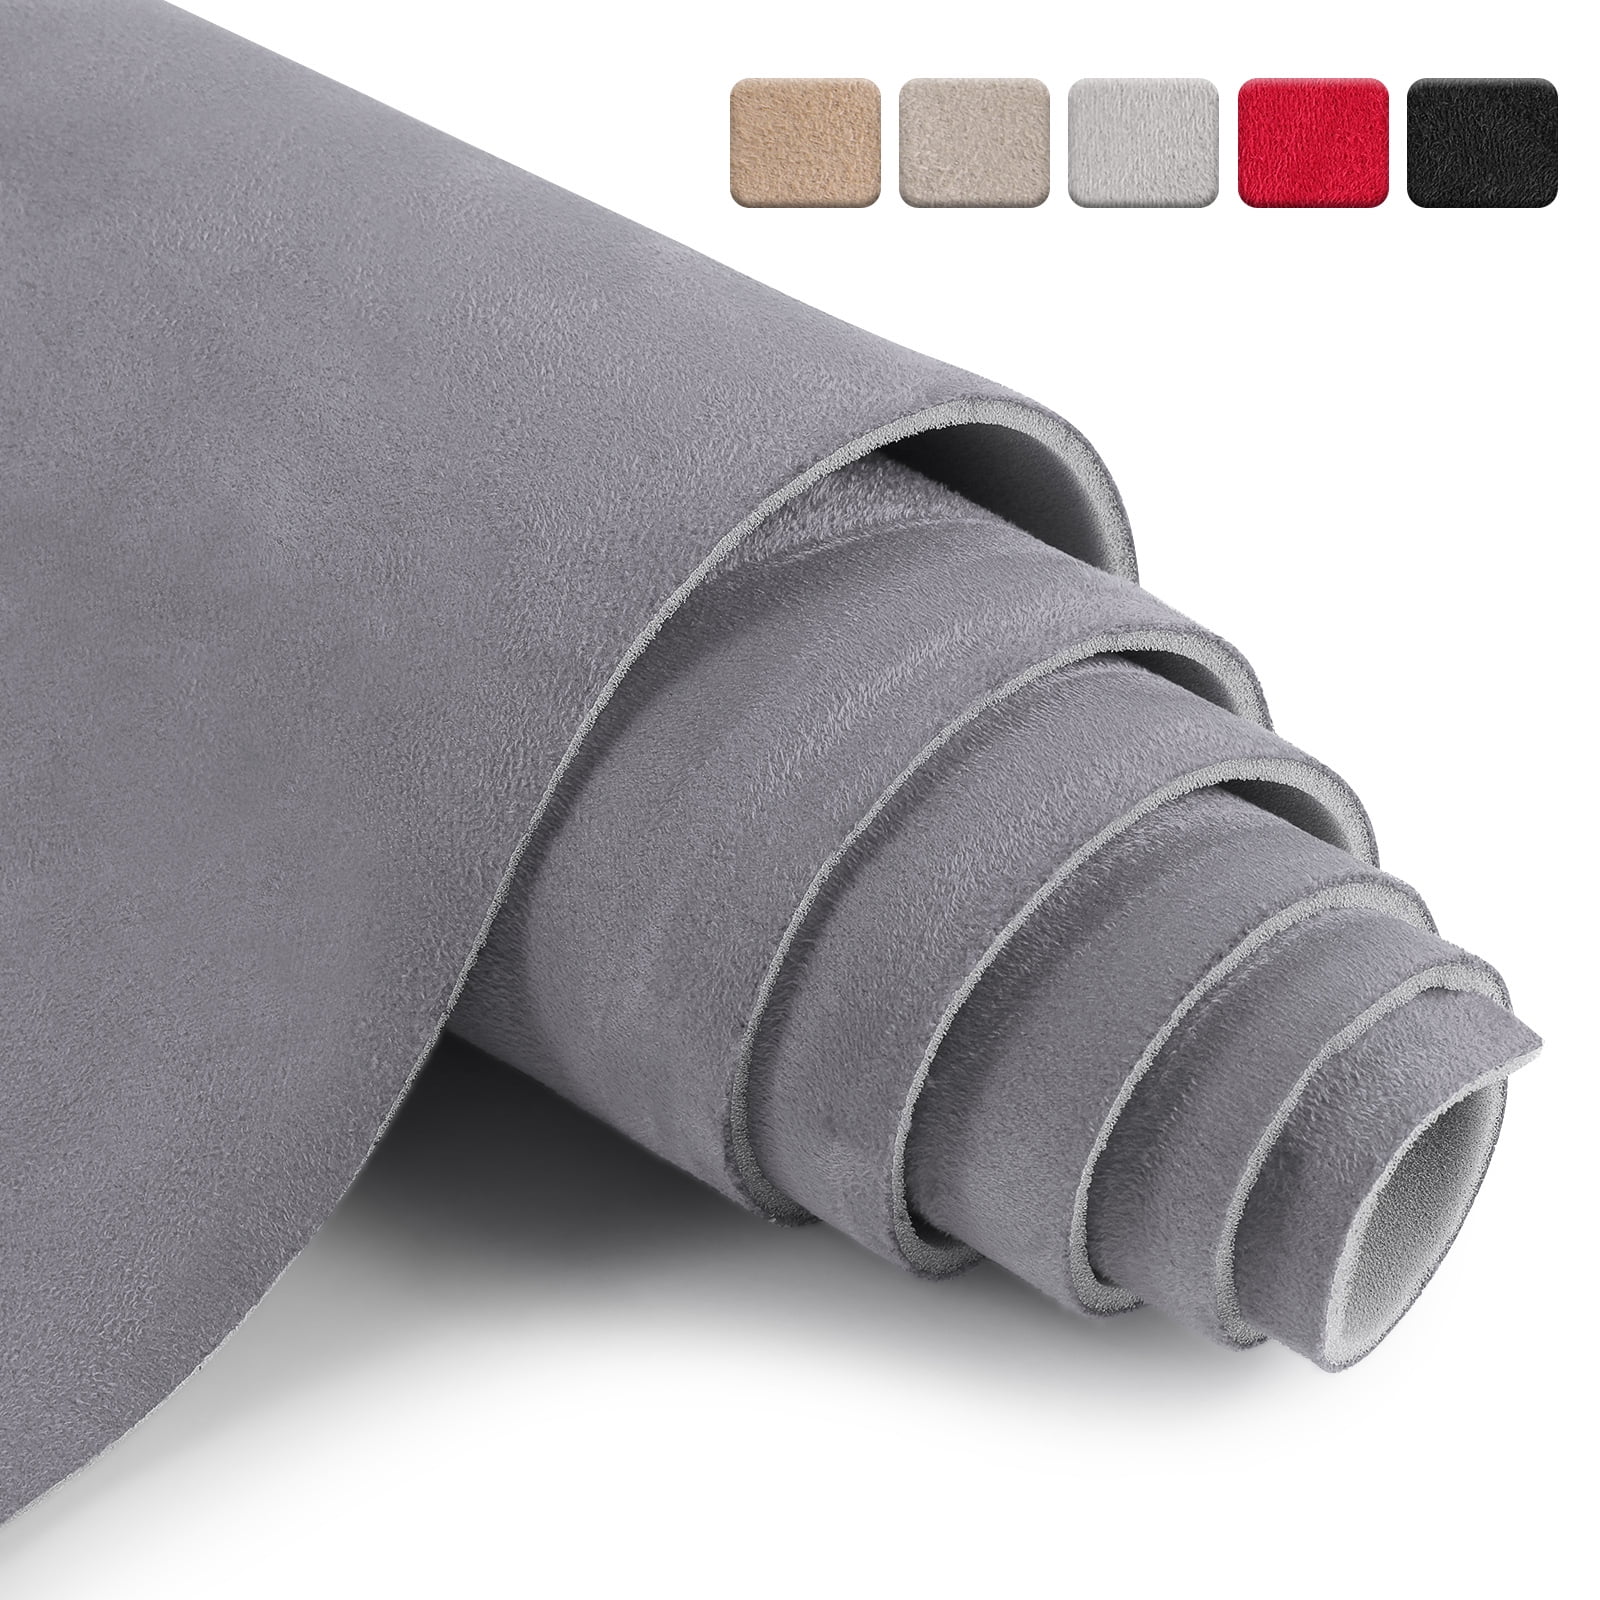 Car Elements Suede Fabric by The Yard 60 inchx36 inch Soft Ventilation Material Polyester Synthetic Suede Fabric(Double Side) for Car Headliner, Cushion, Boats